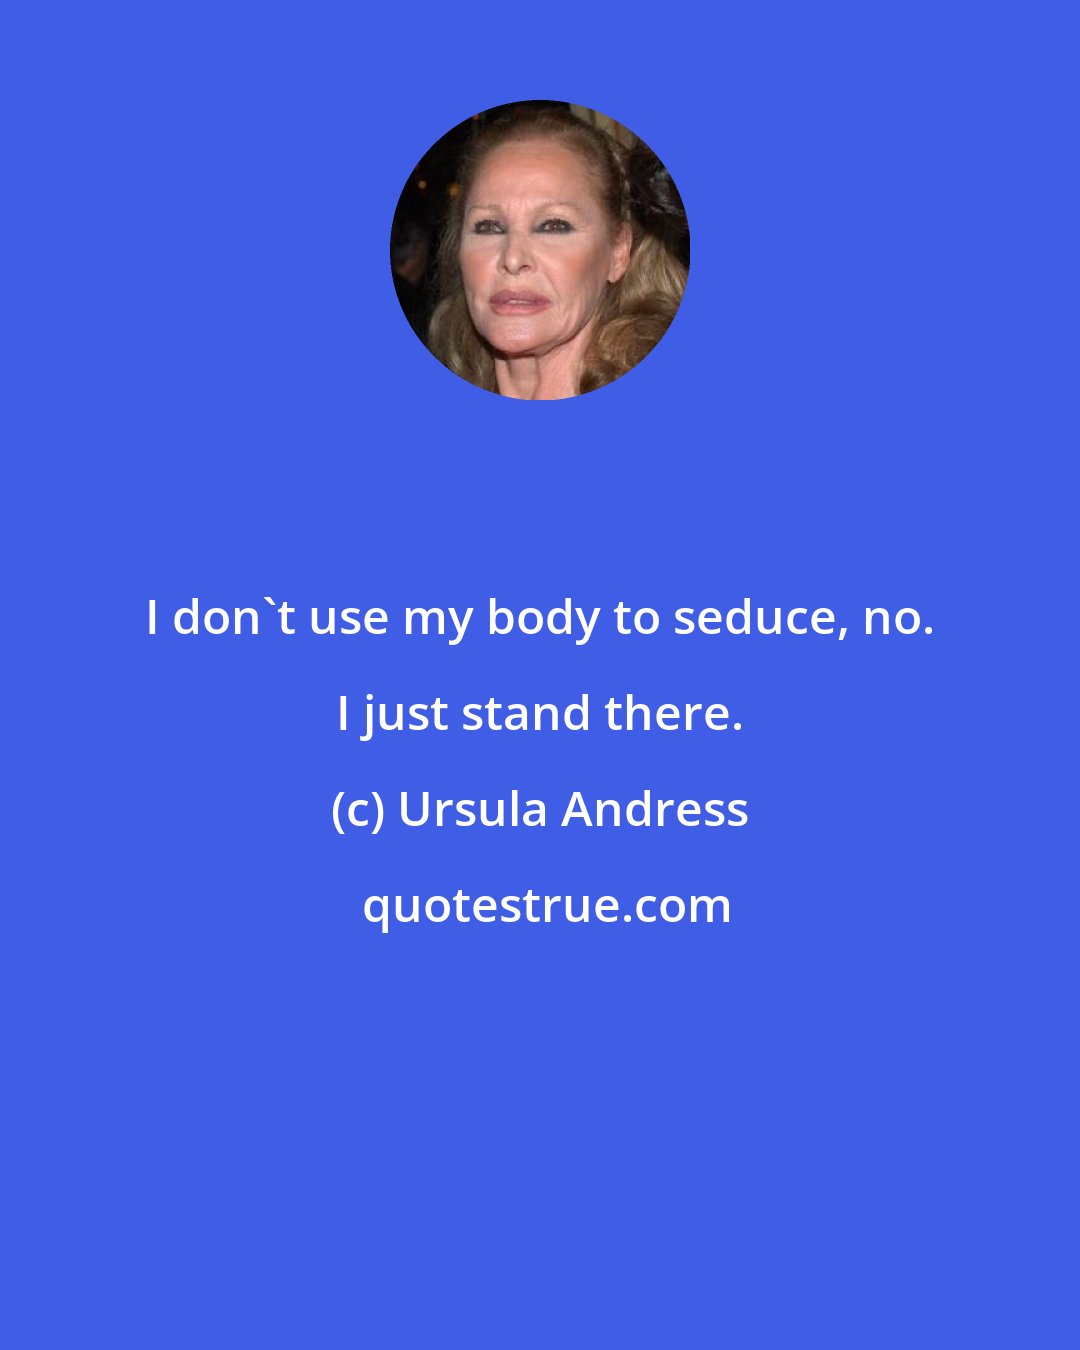 Ursula Andress: I don't use my body to seduce, no. I just stand there.